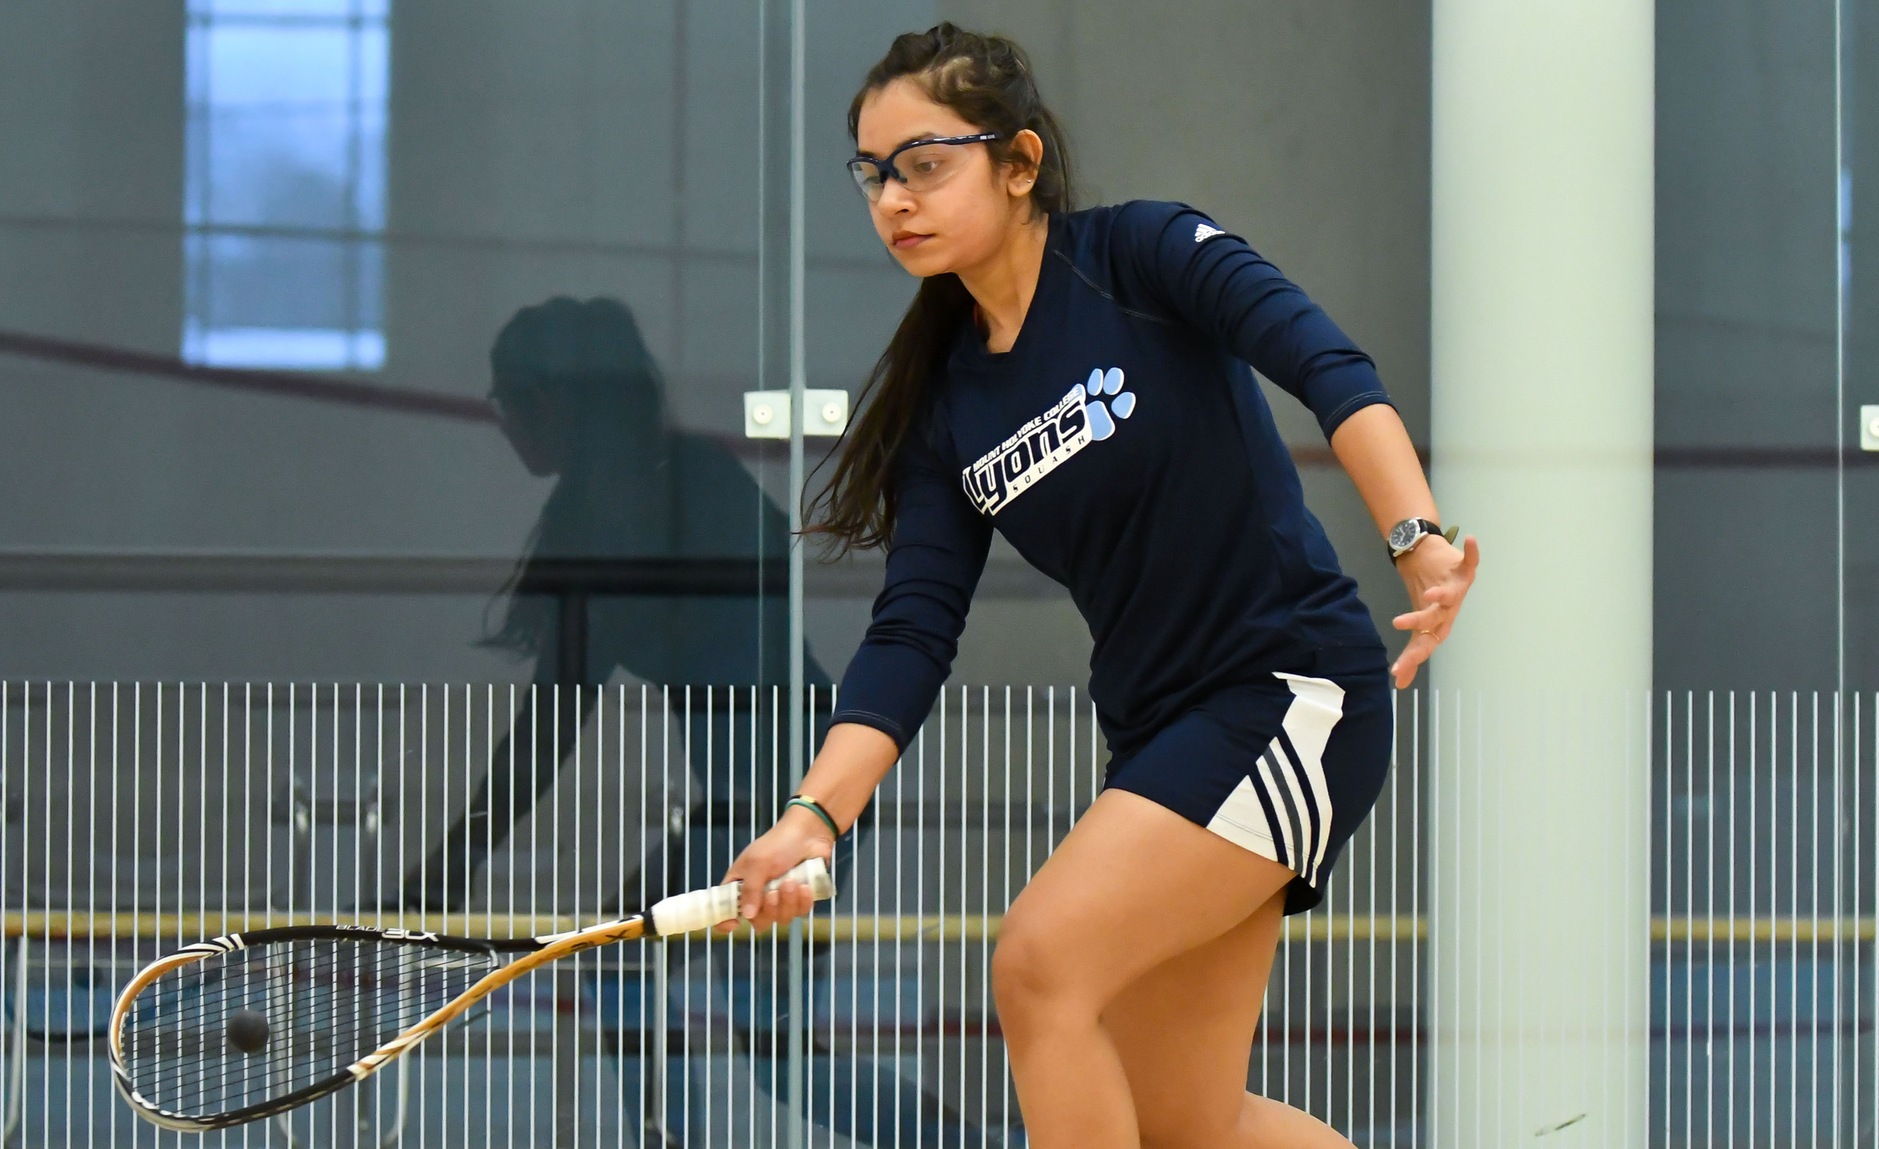 Squash Falls In Semifinals of the Epps Cup (D Division) at CSA Championships